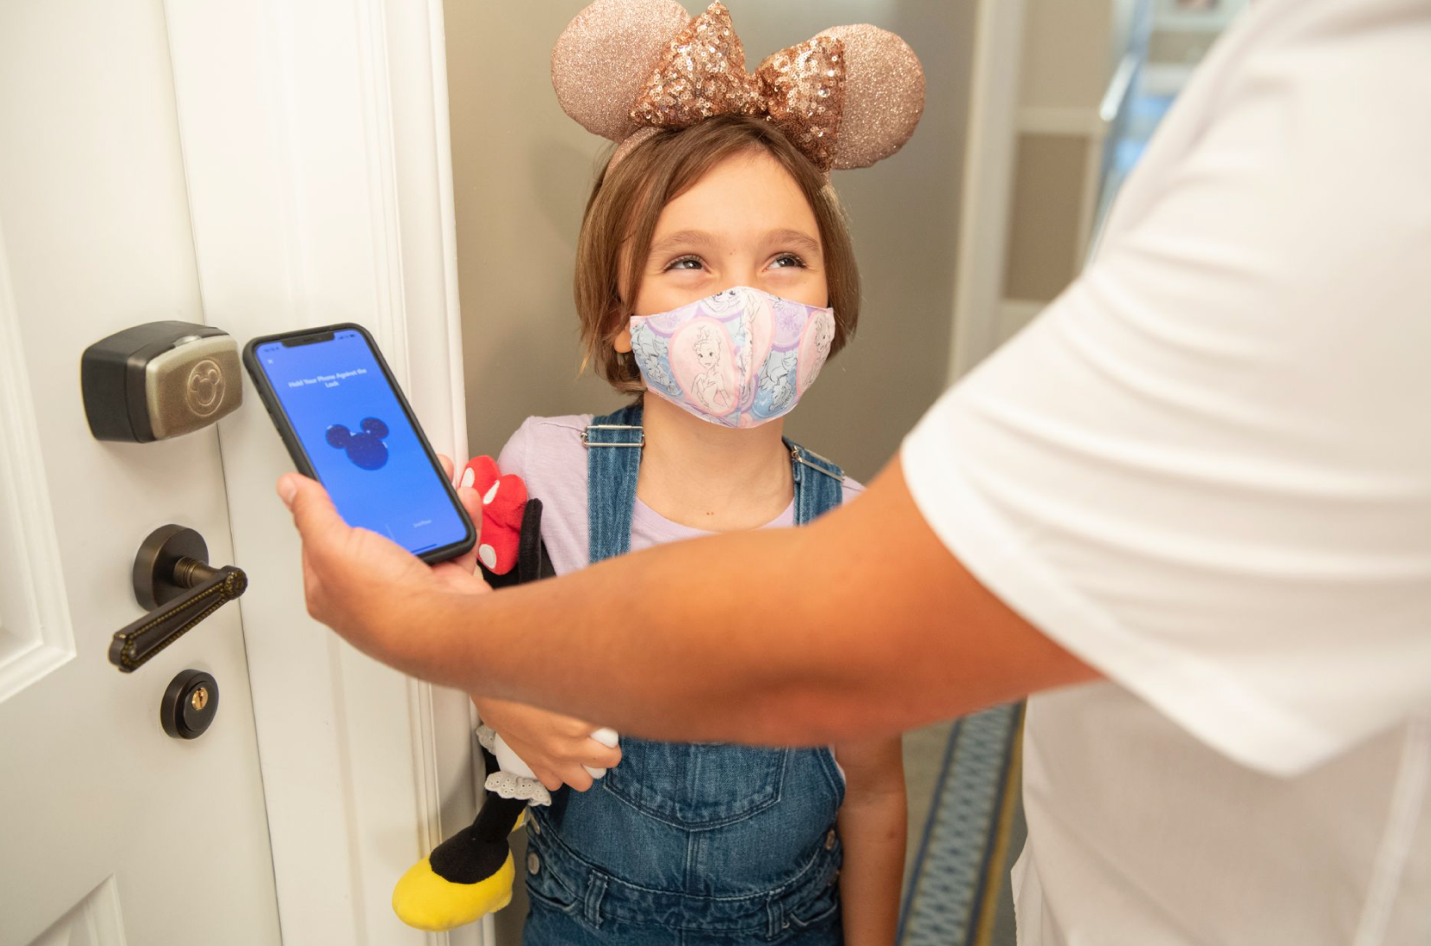 A little girl wearing Minnie Mouse Ears smiles as dad uses his mobile phone to unlock their Disney Resort hotel room door.